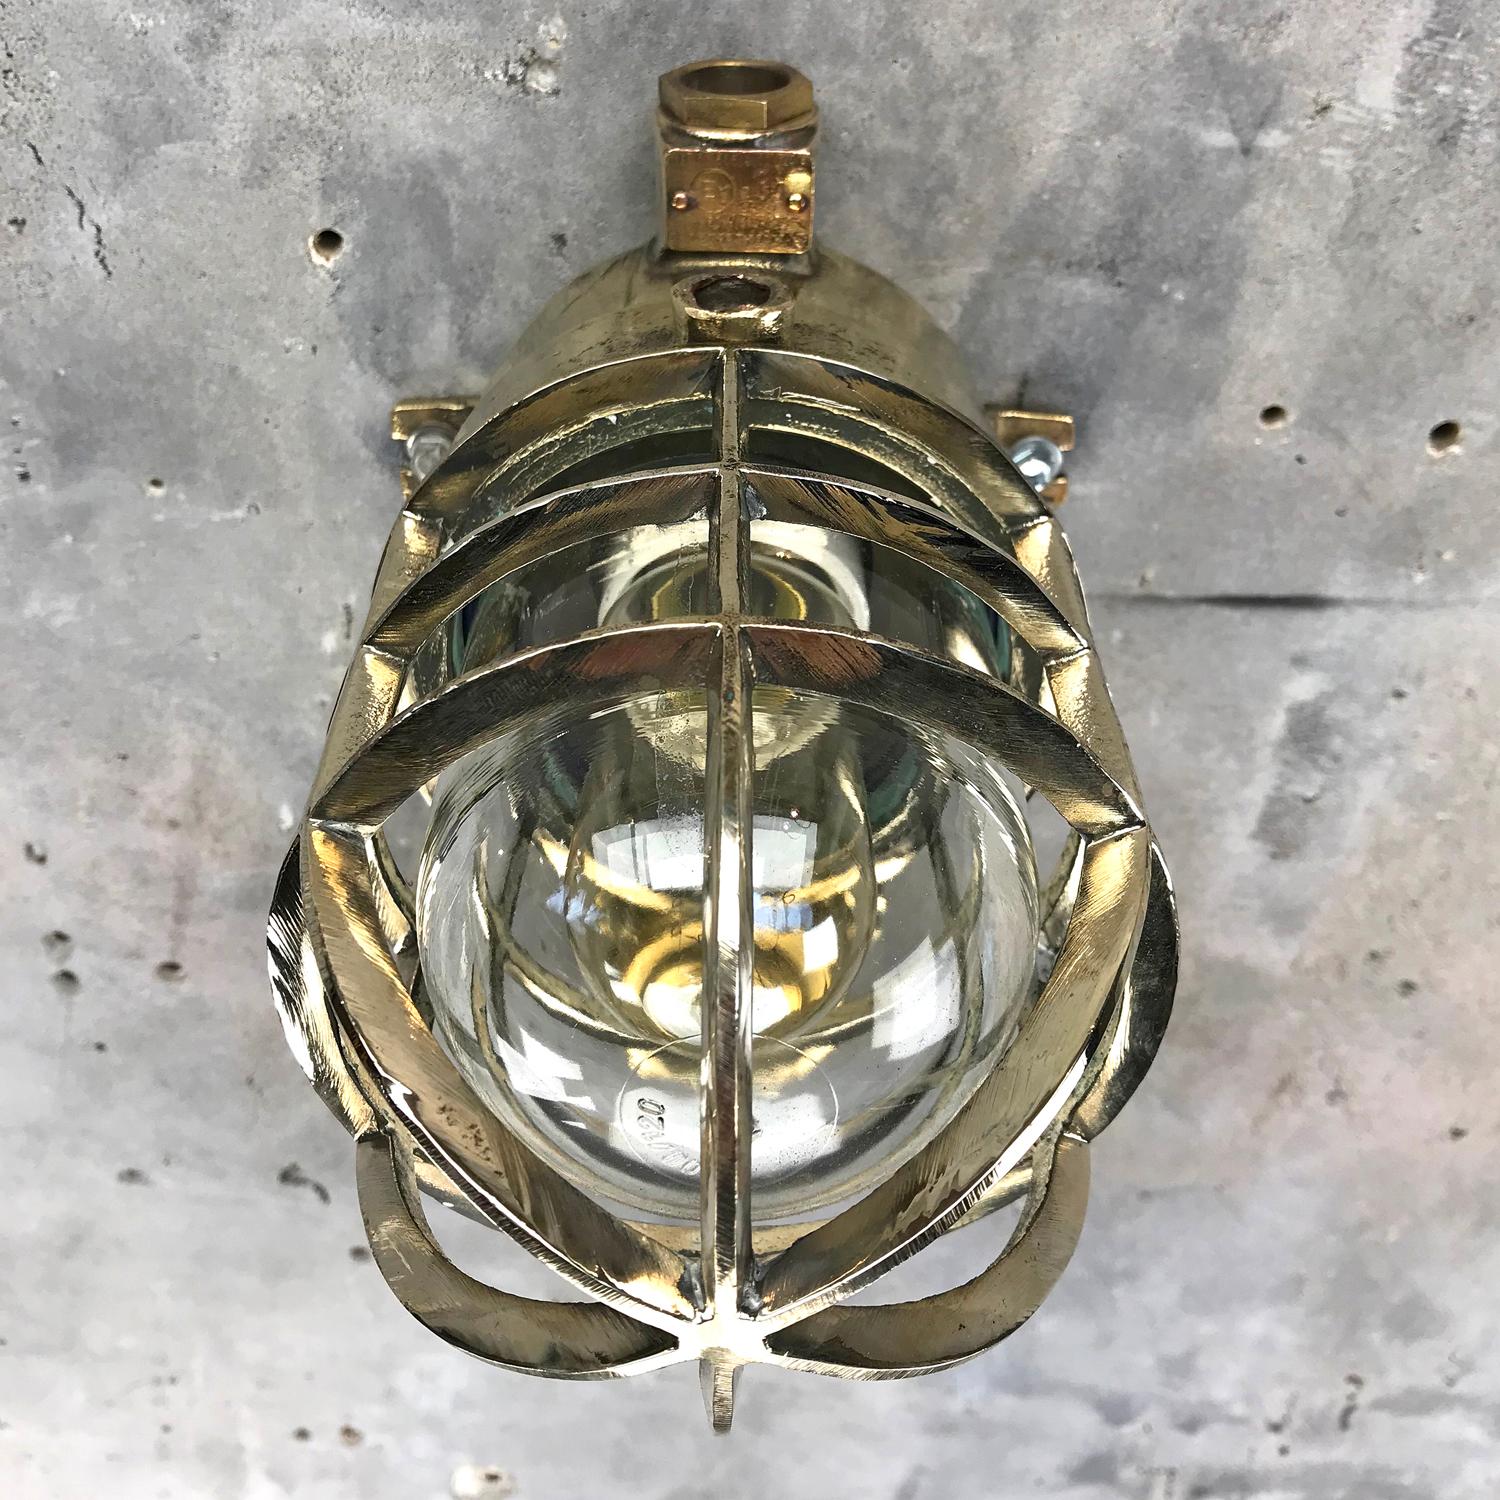 1970s German Explosion Proof Wall Light Cast Brass, Glass Shade and Junction Box 5